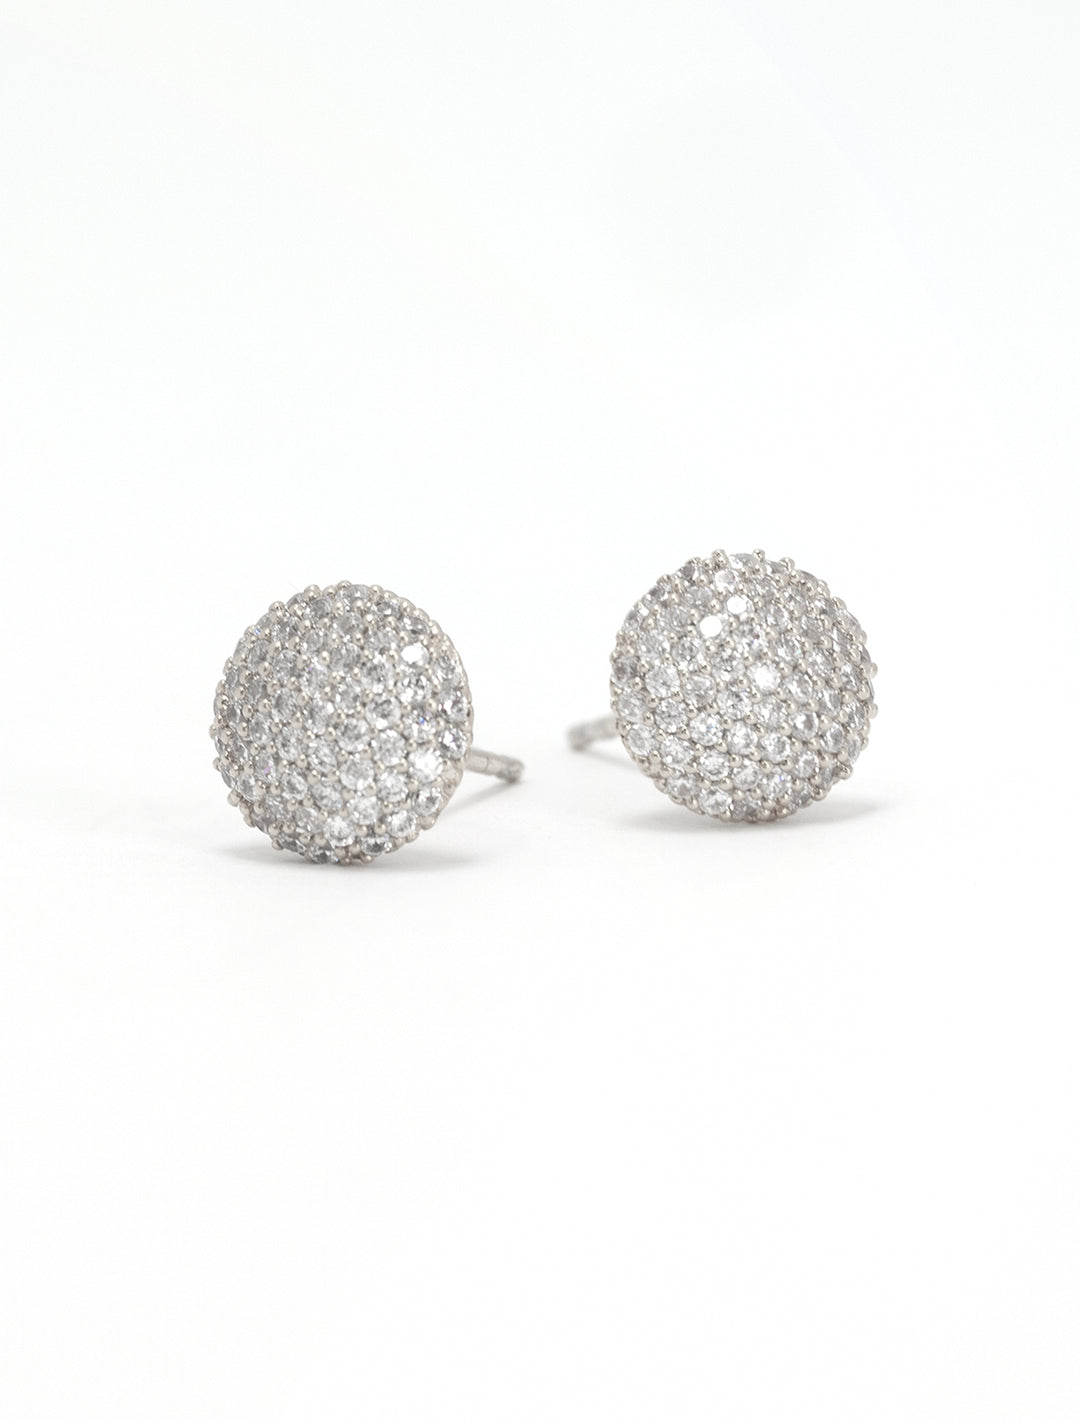 Close-up view of Tai's cz button stud earrings in silver.